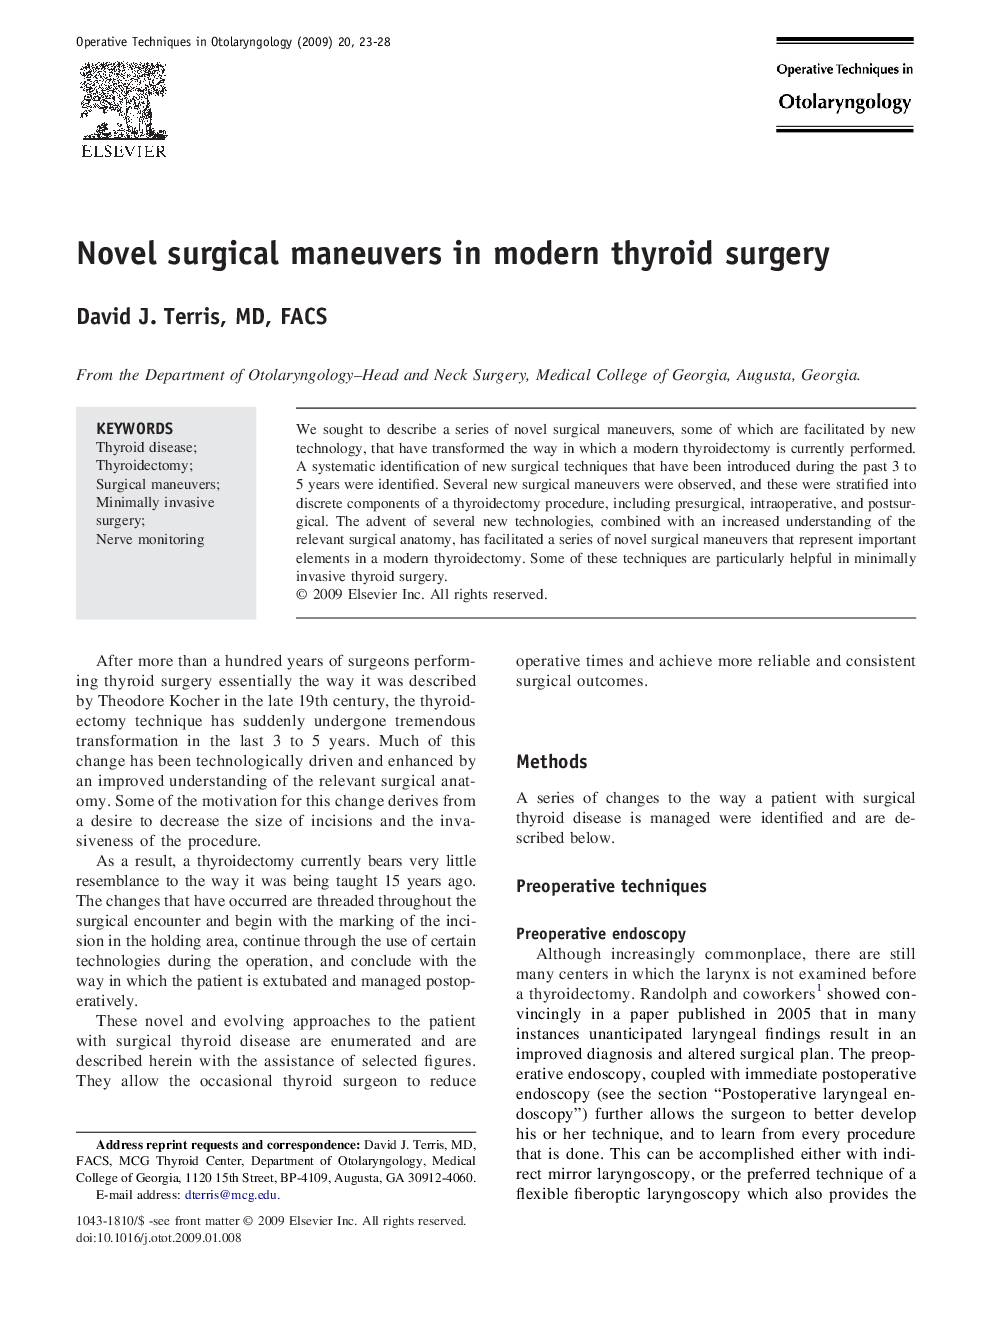 Novel surgical maneuvers in modern thyroid surgery